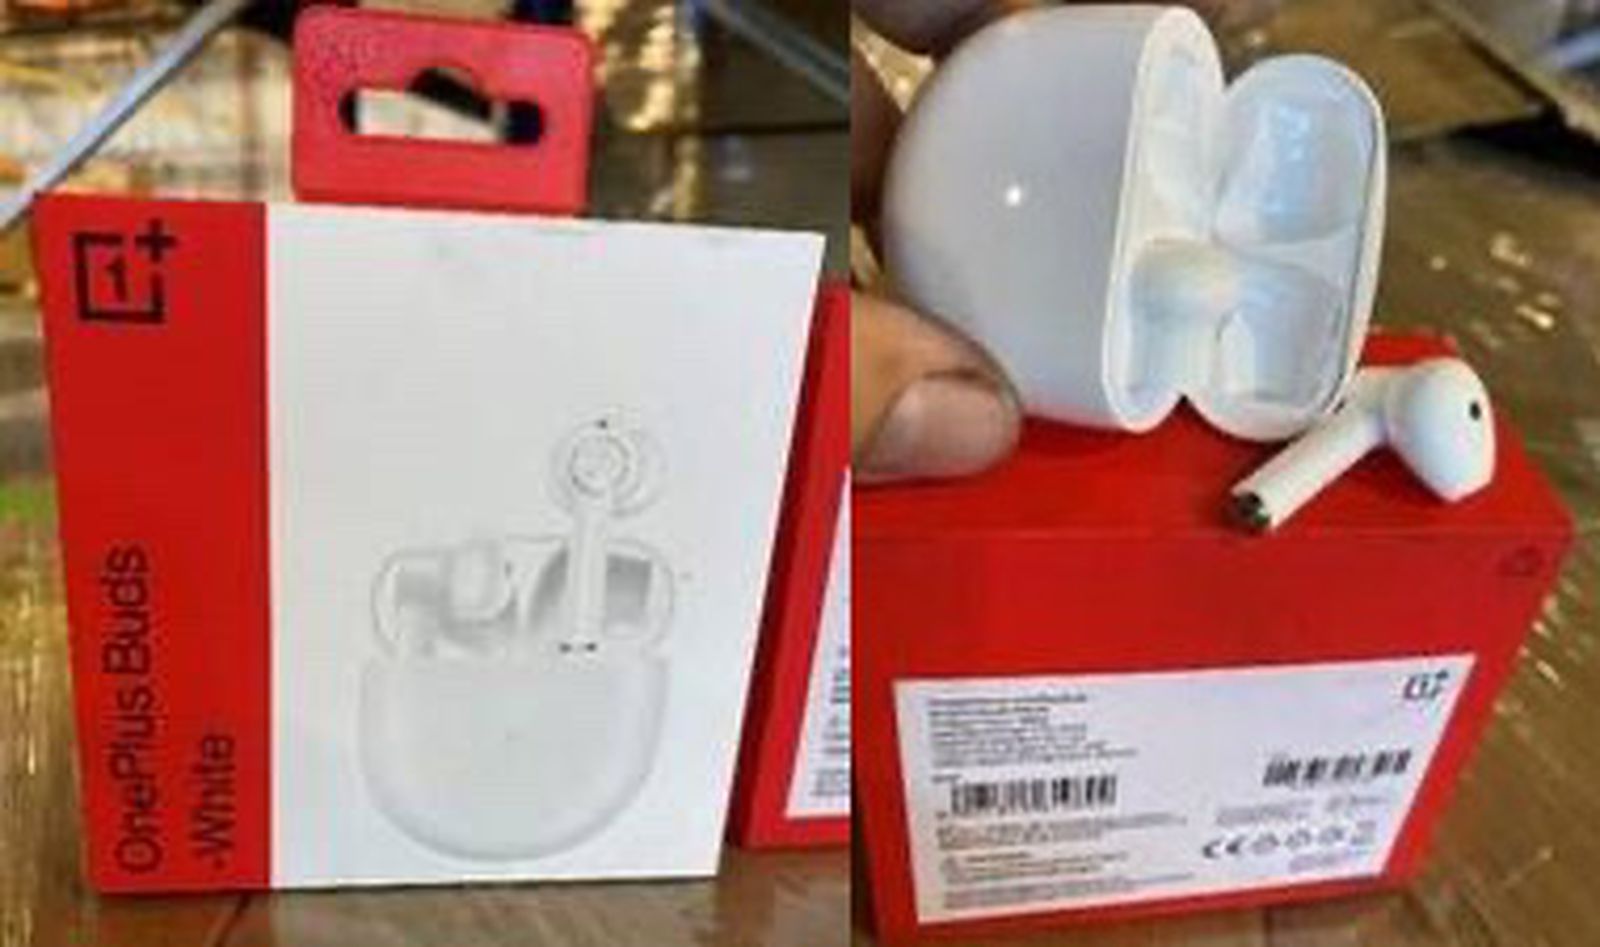 US Border Patrol seized 2,000 OnePlus devices as "fake Apple AirPods"